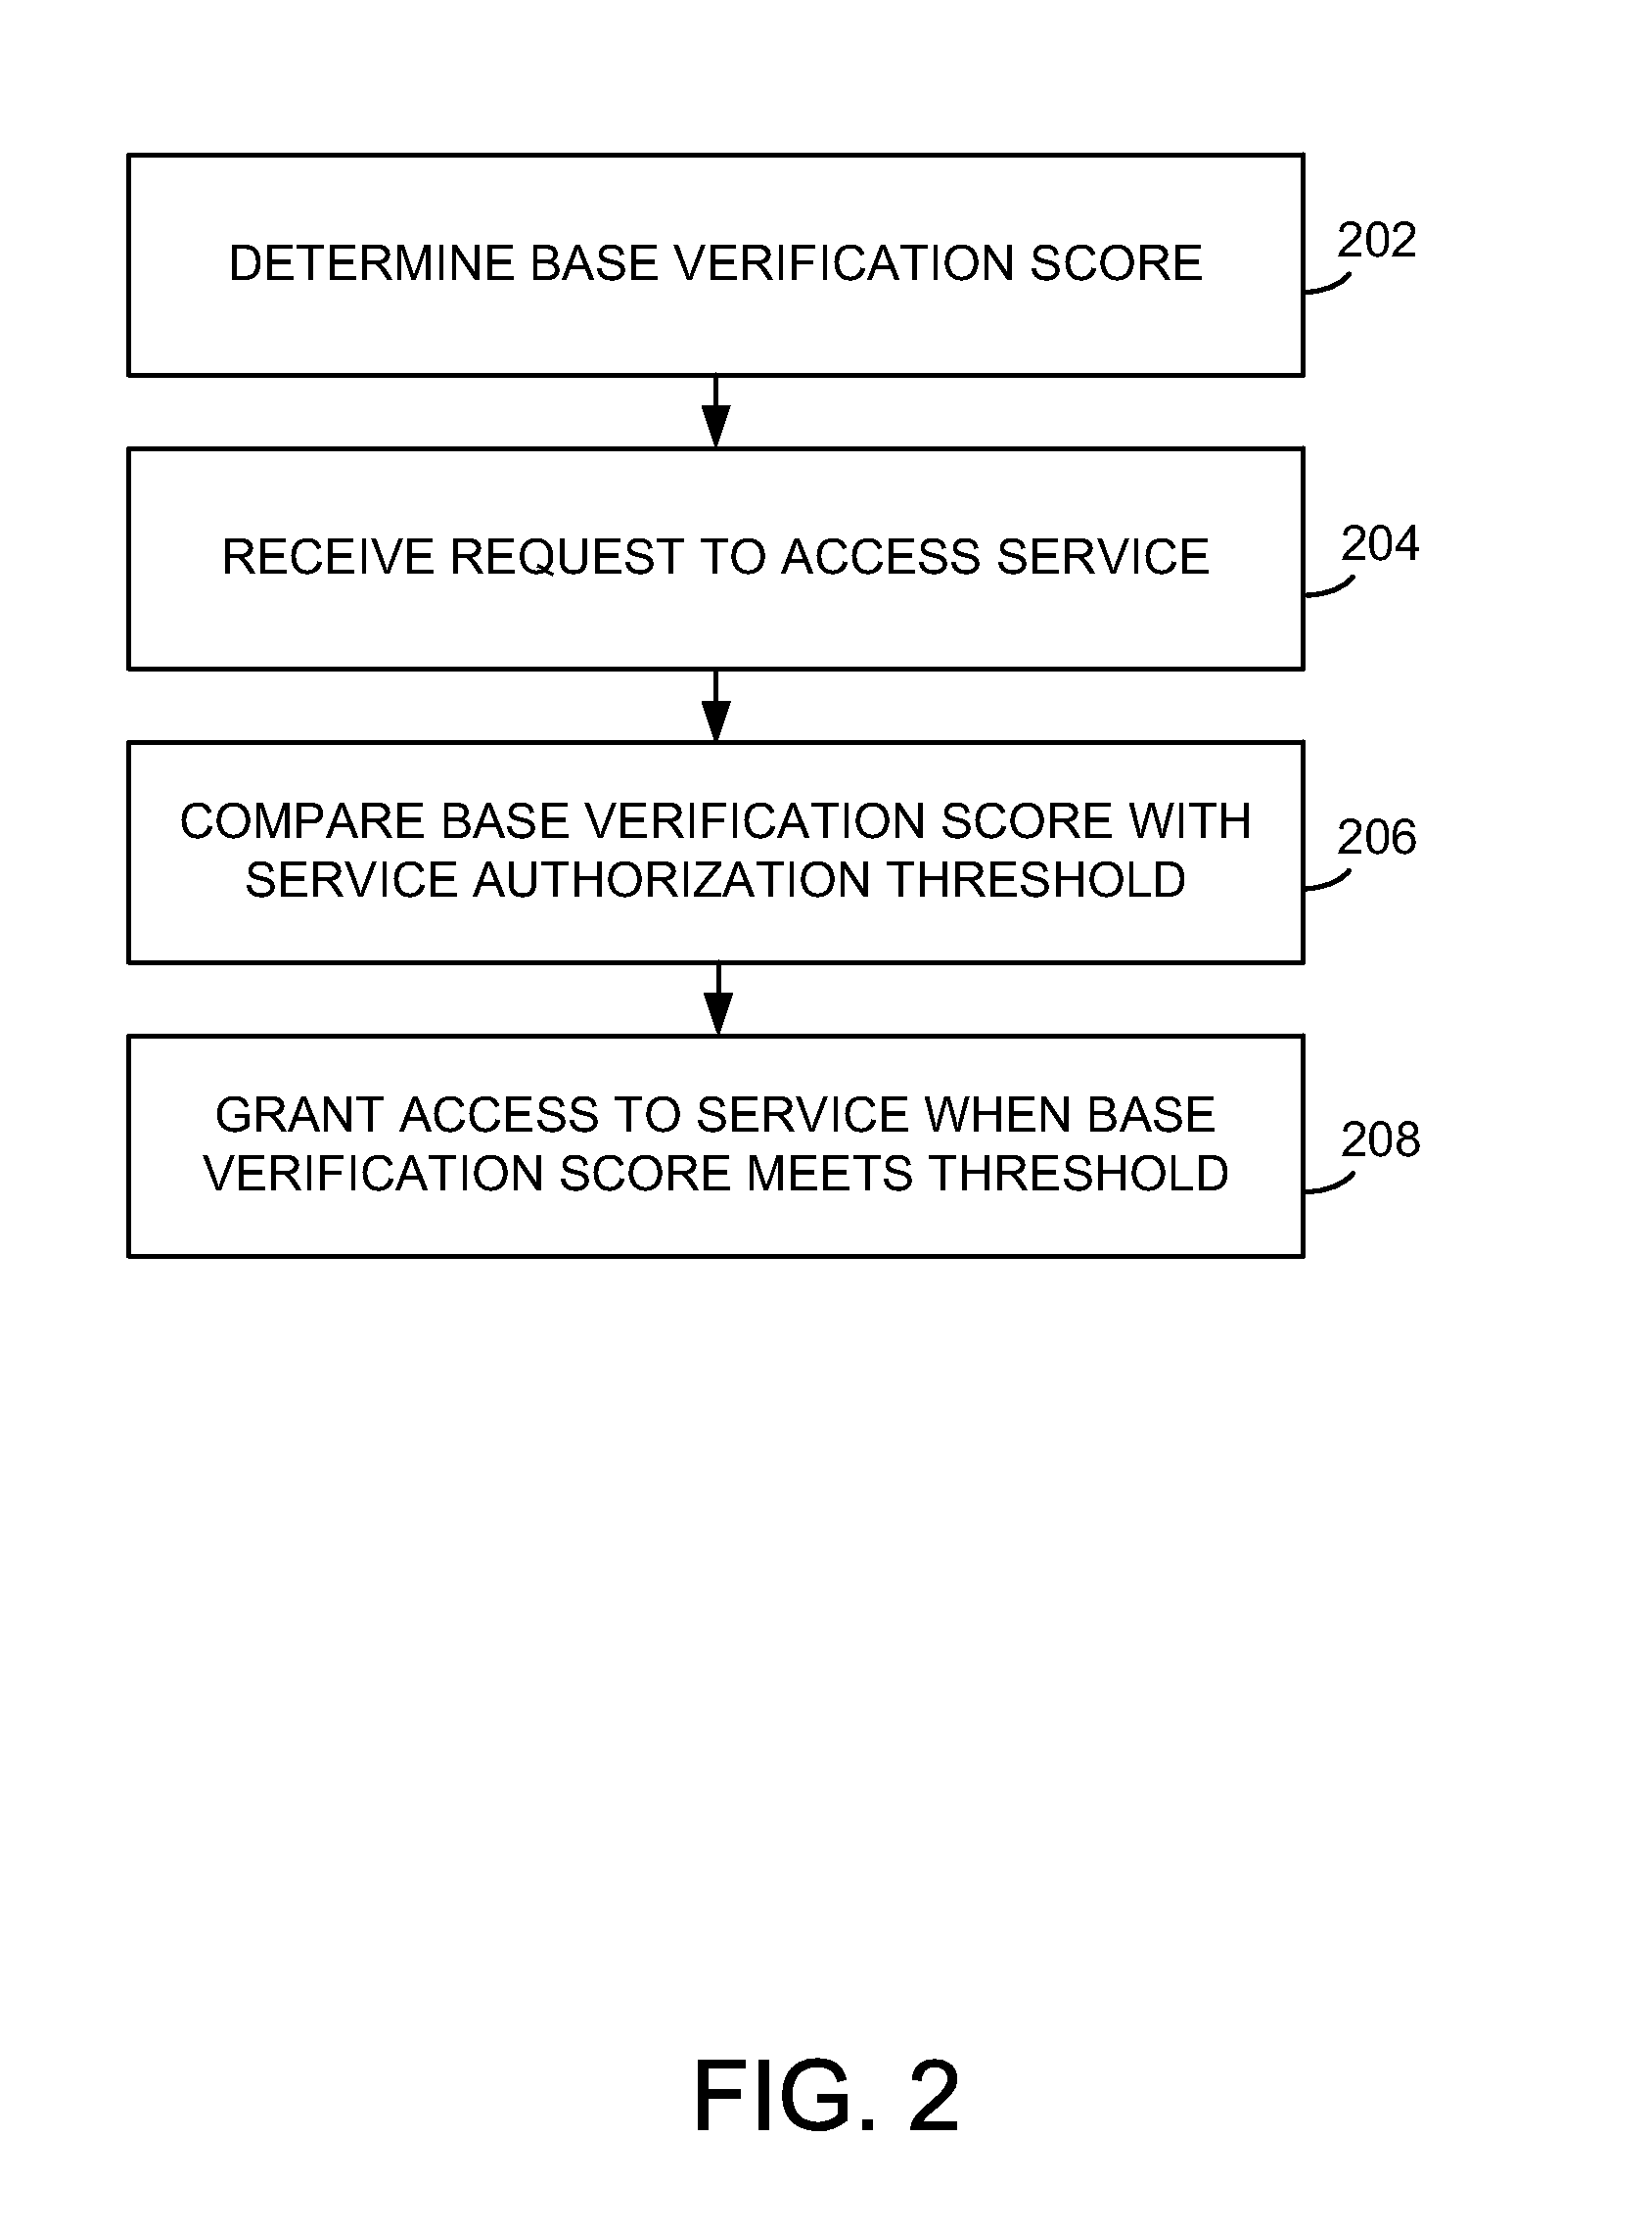 Systems and methods of verifying an authentication using dynamic scoring